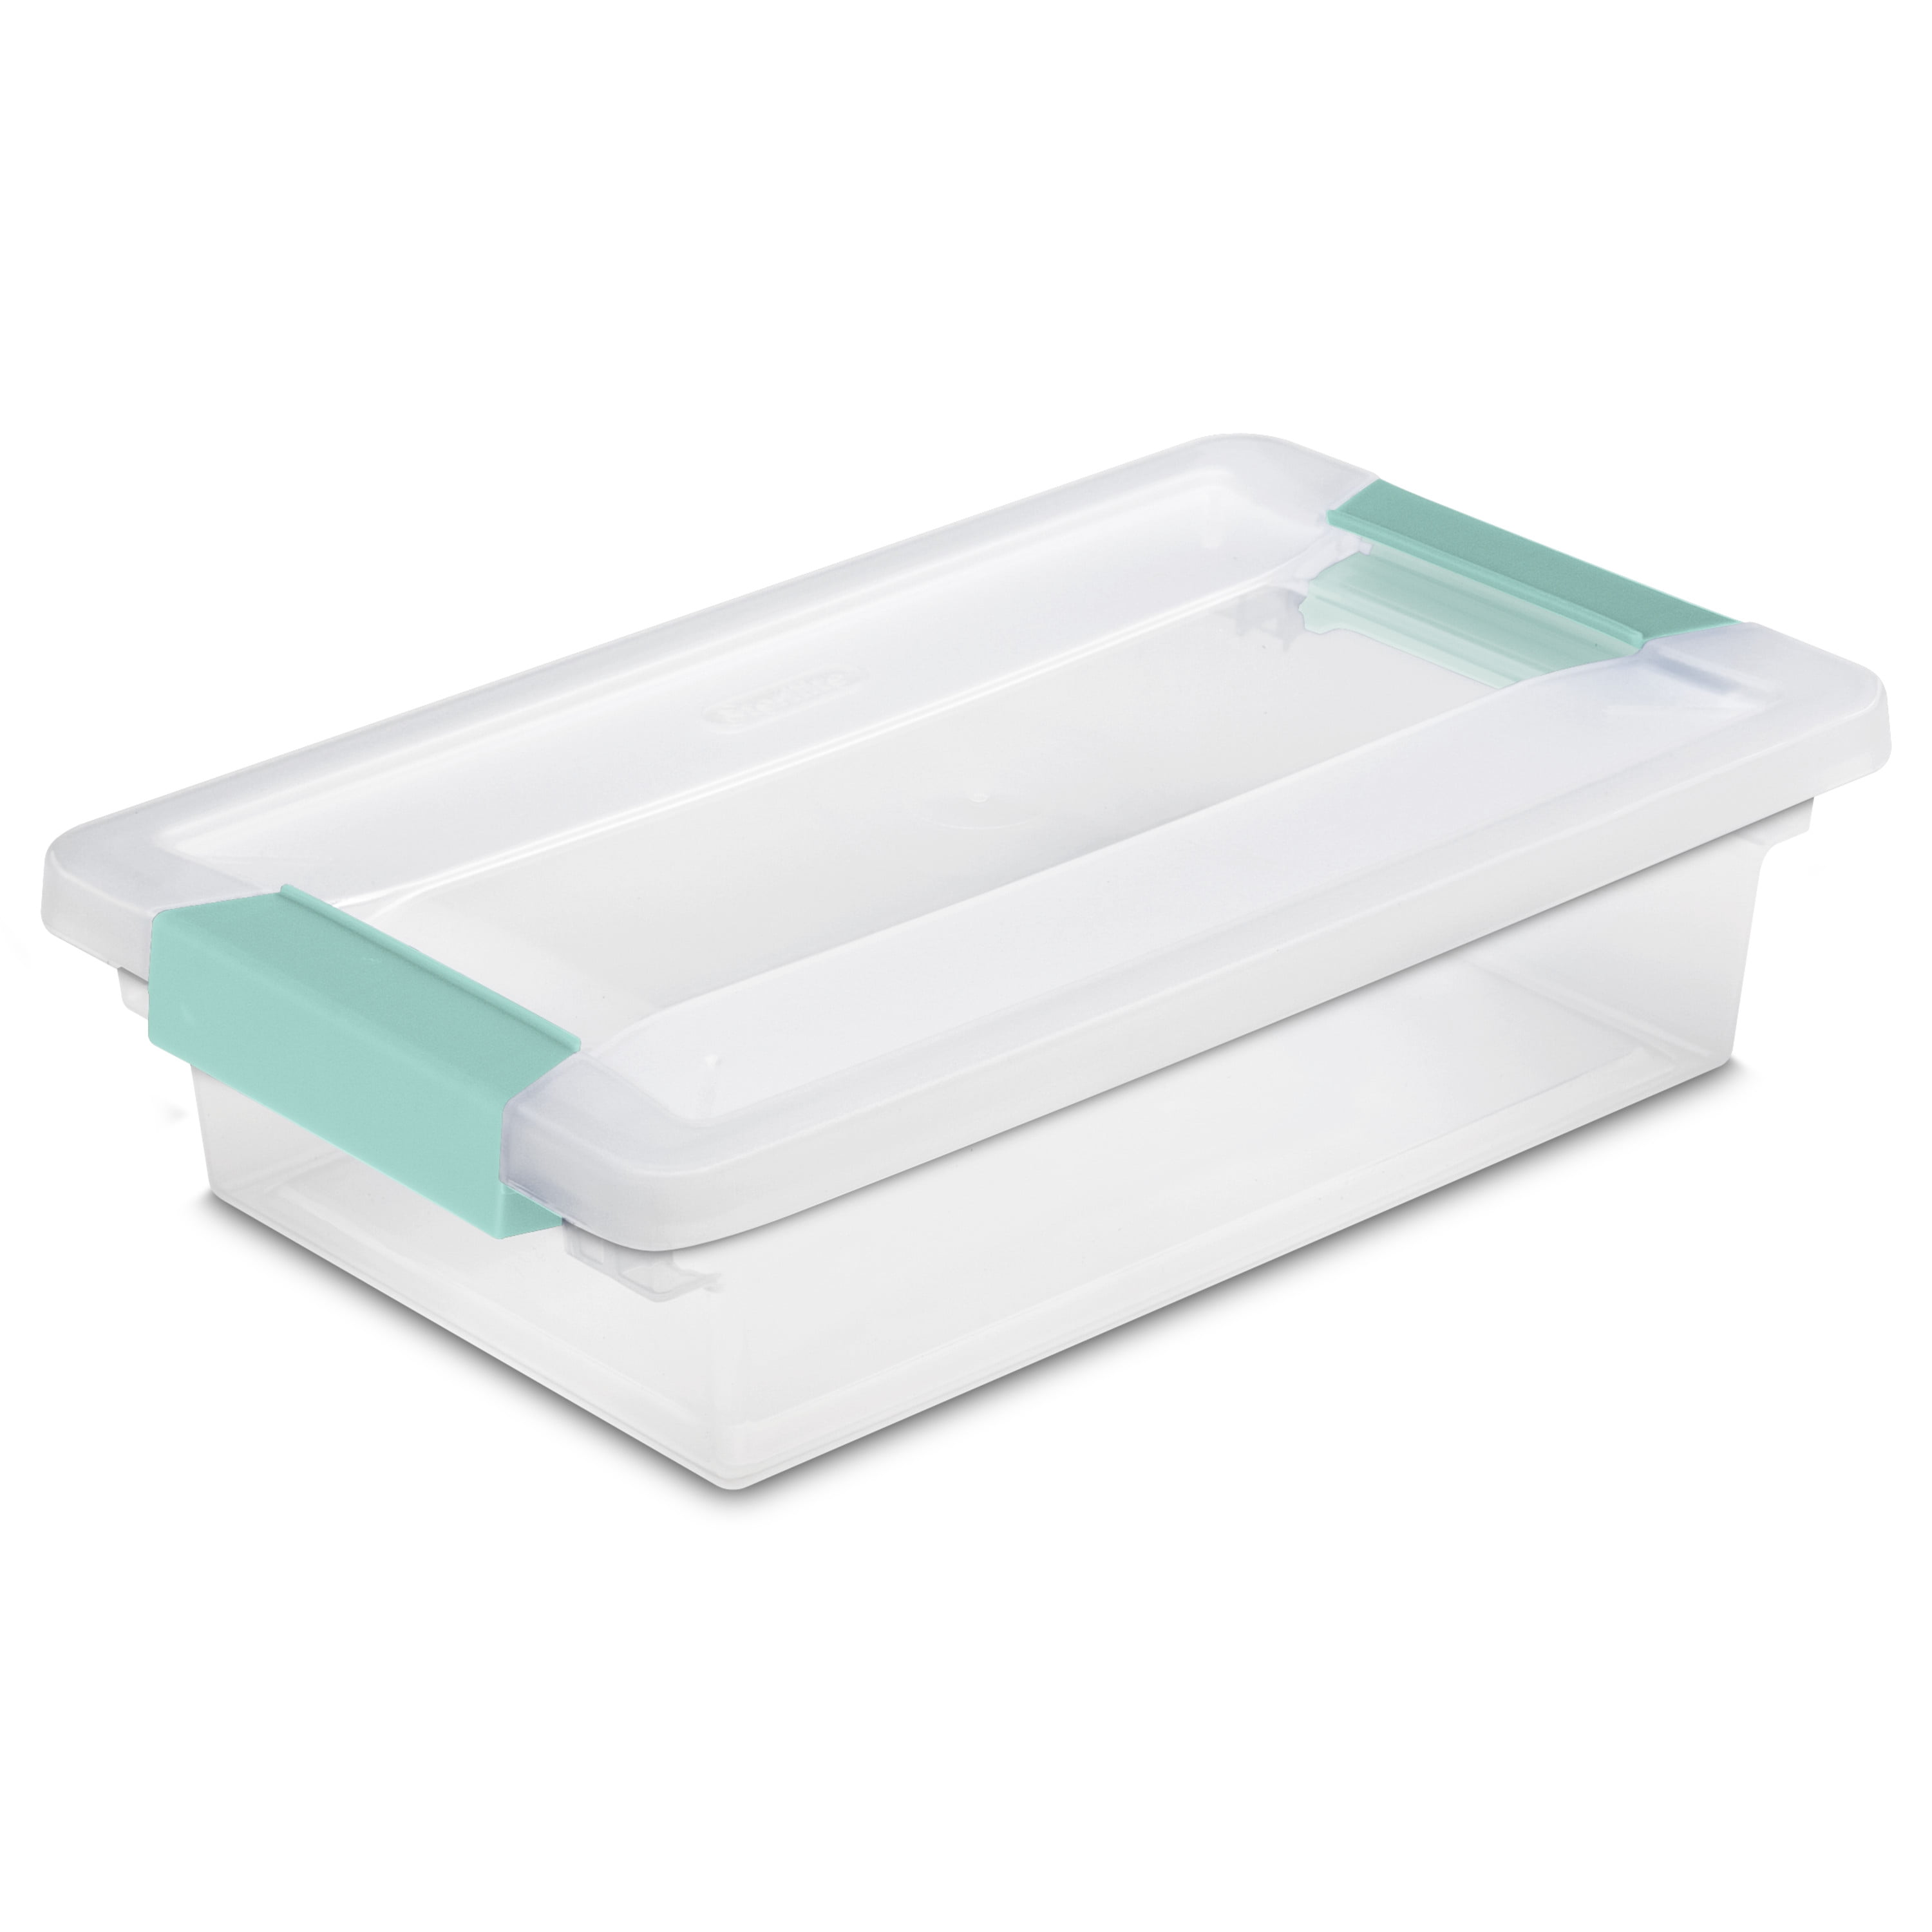 Details about   Sterilite 19618606 Small Clip Box 6-Pack Clear Storage Containers color latch 